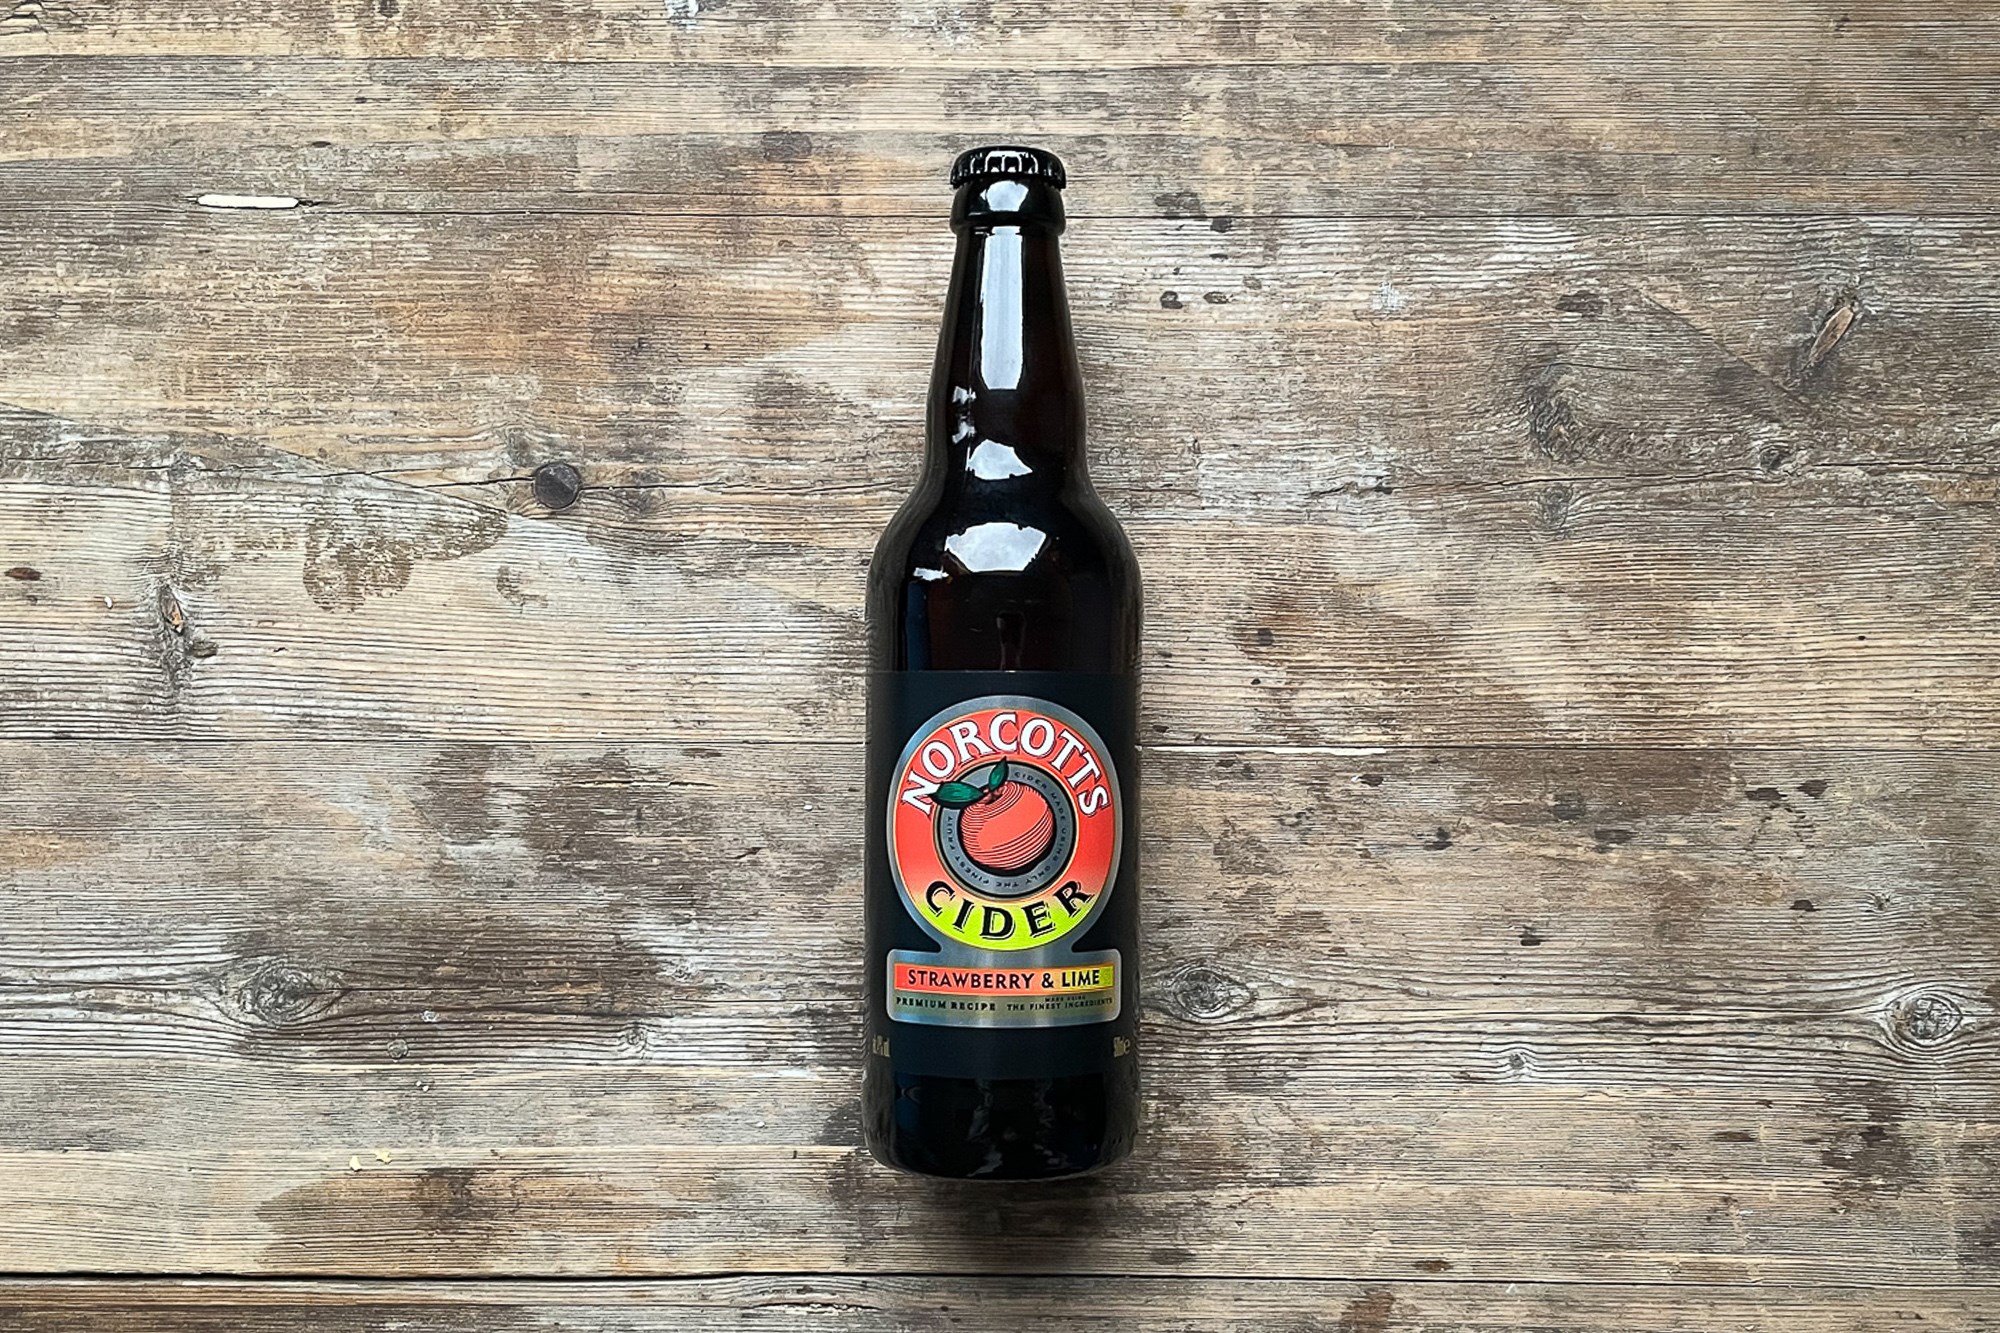 Norcotts Strawberry and Lime Cider - 500ml